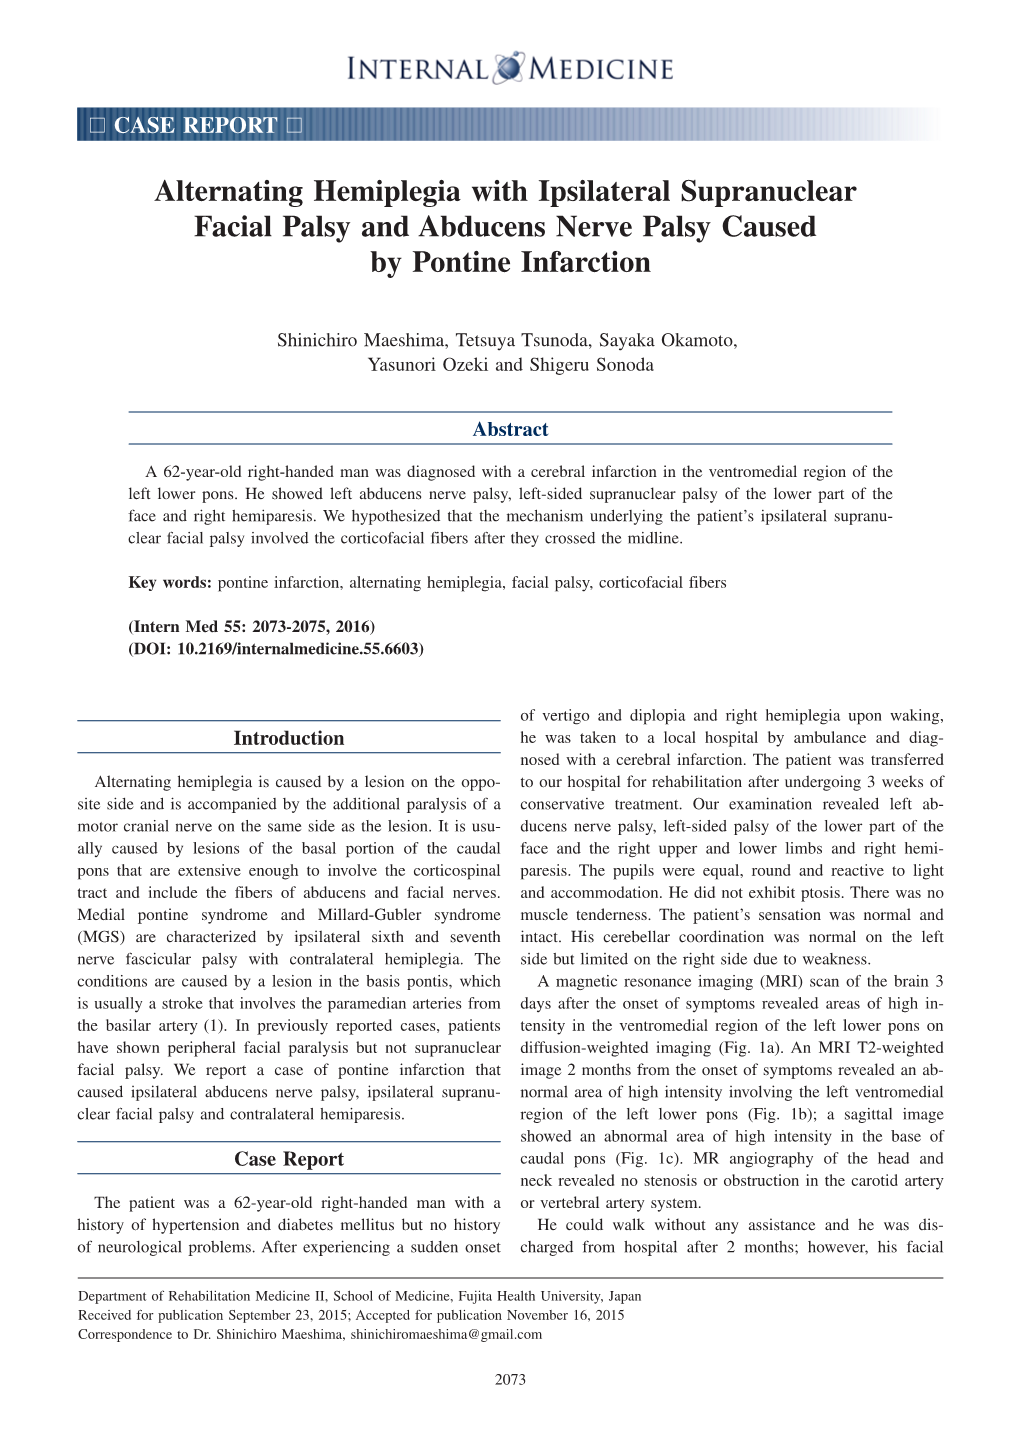 Alternating Hemiplegia with Ipsilateral Supranuclear Facial Palsy and Abducens Nerve Palsy Caused by Pontine Infarction